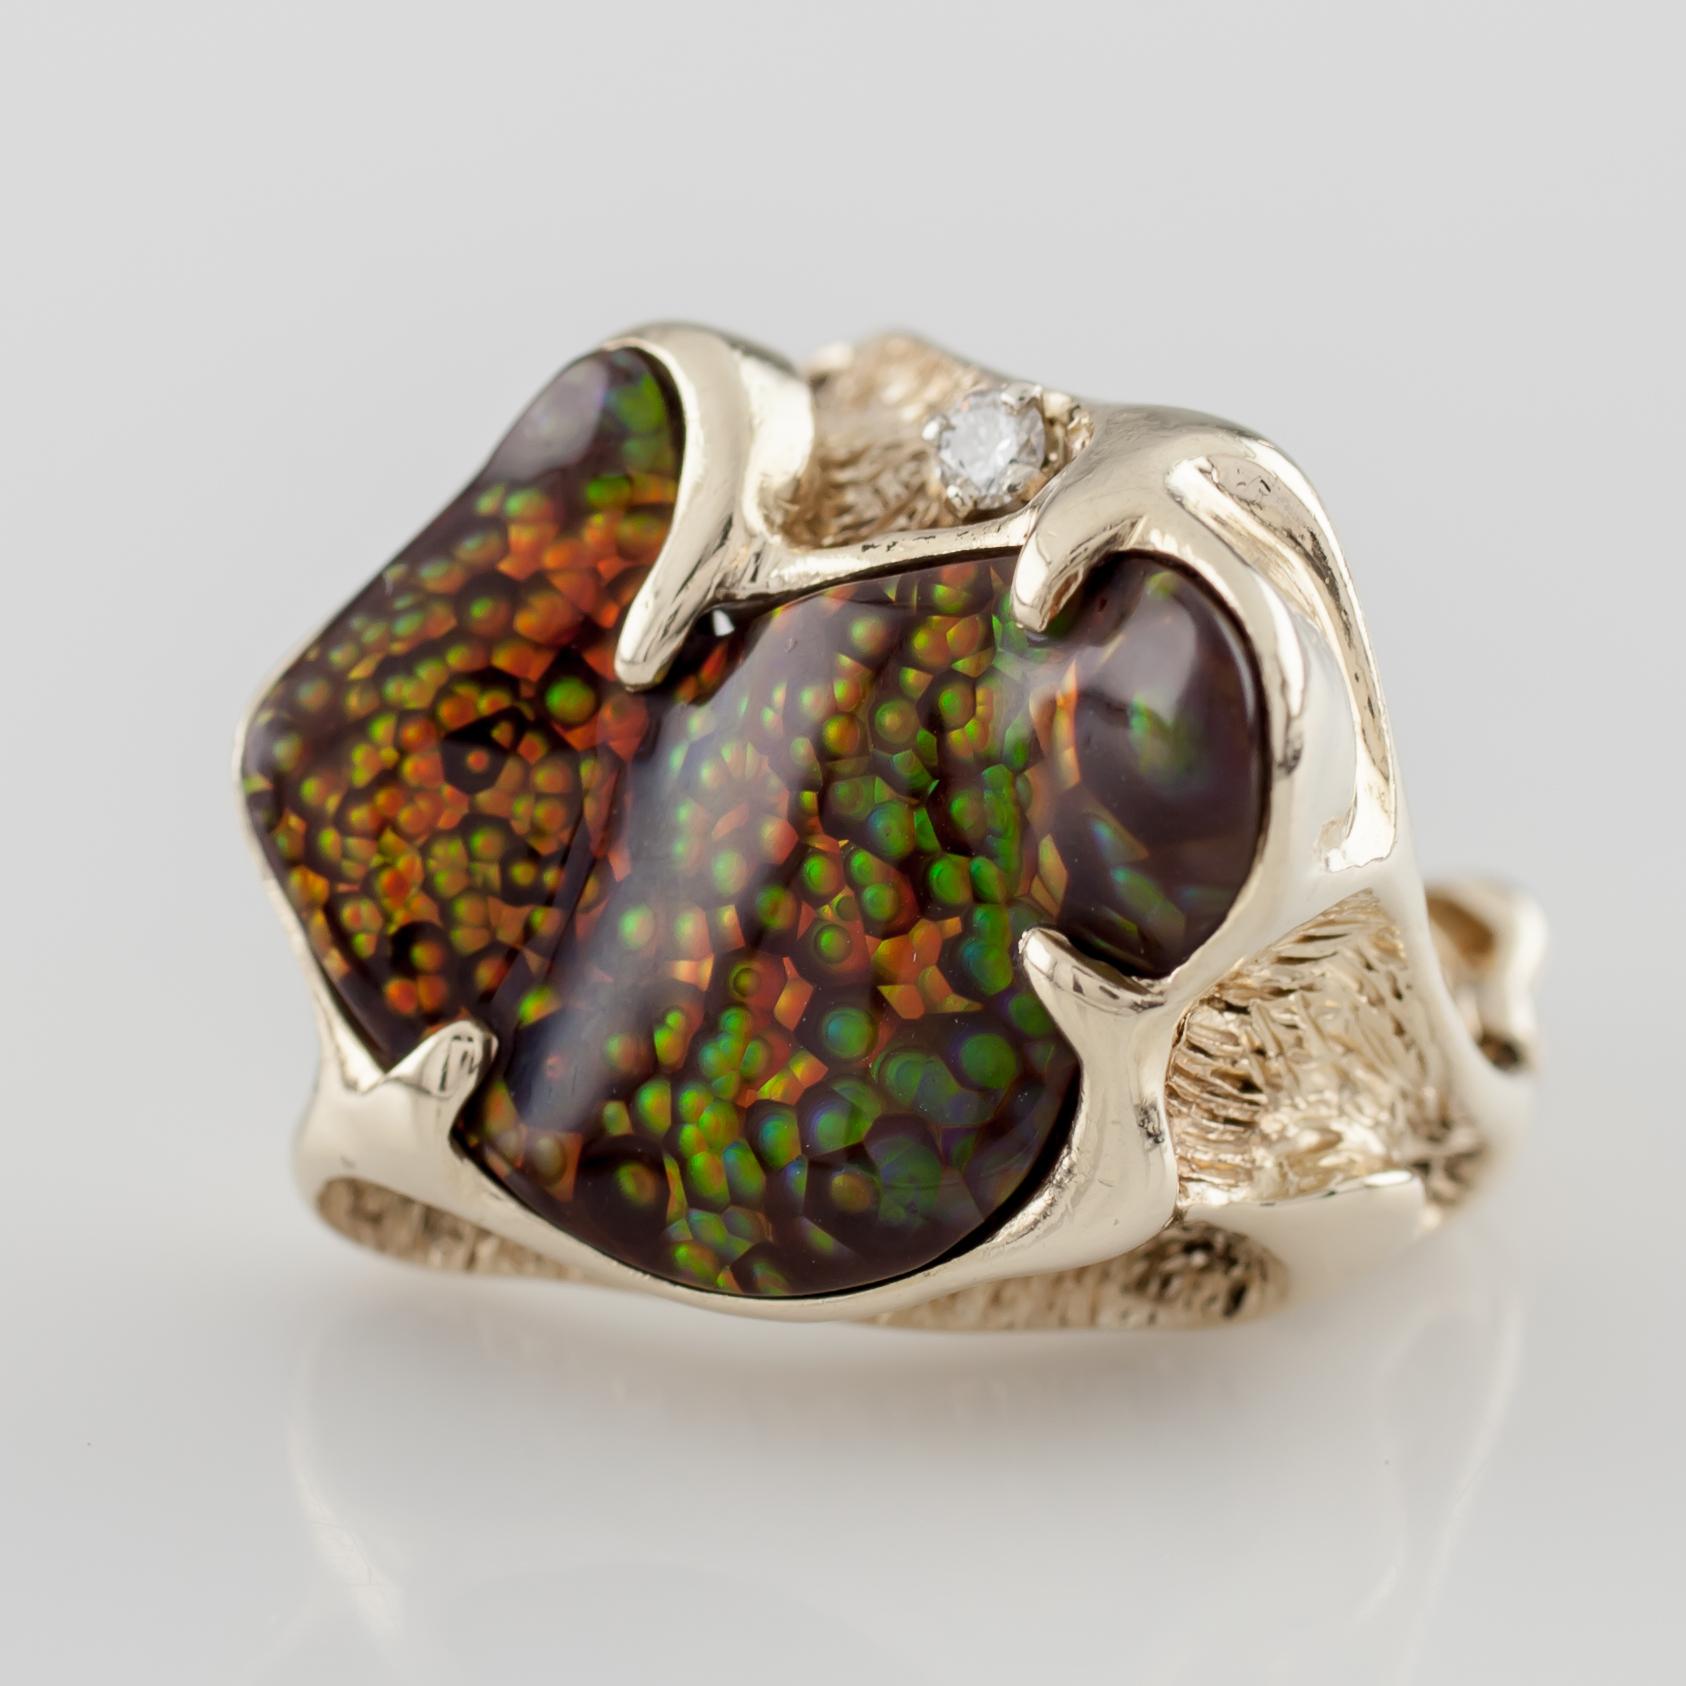 Gorgeous Custom-Molded Fire Agate Ring 
Ring Includes Diamond Accent
Approximate Width of Agate on Ring = 24 mm
Approximate Length of Agate on Ring = 21 mm
Mass of Ring = 18.4 grams